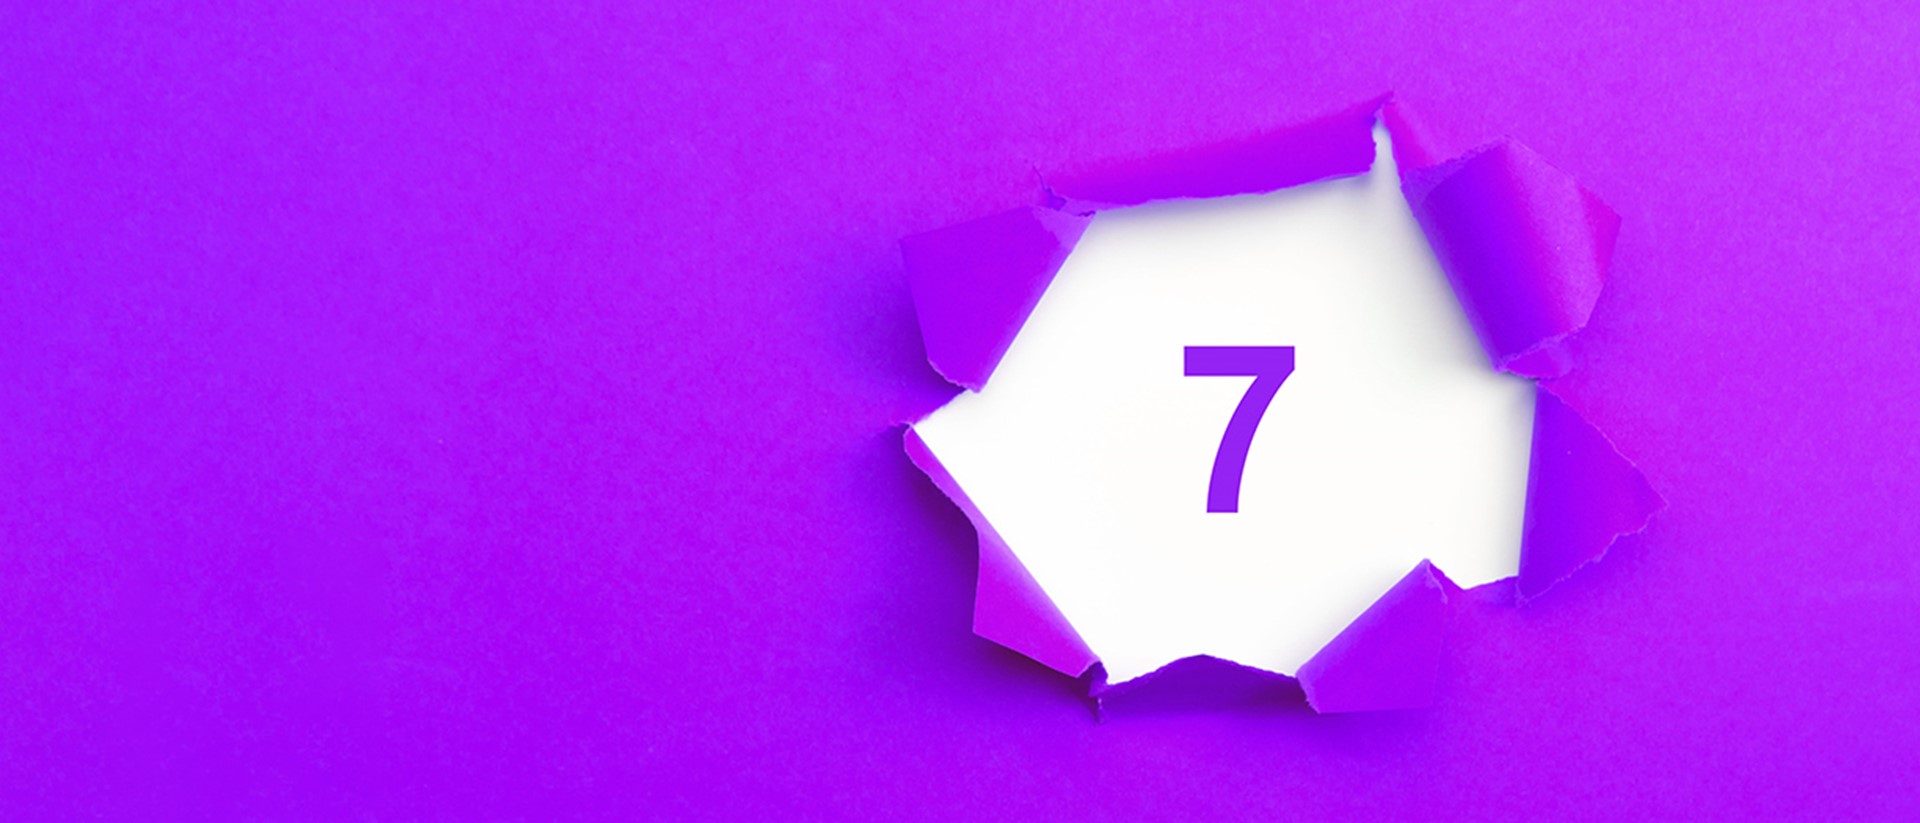 Image of the number 7 on a purple background